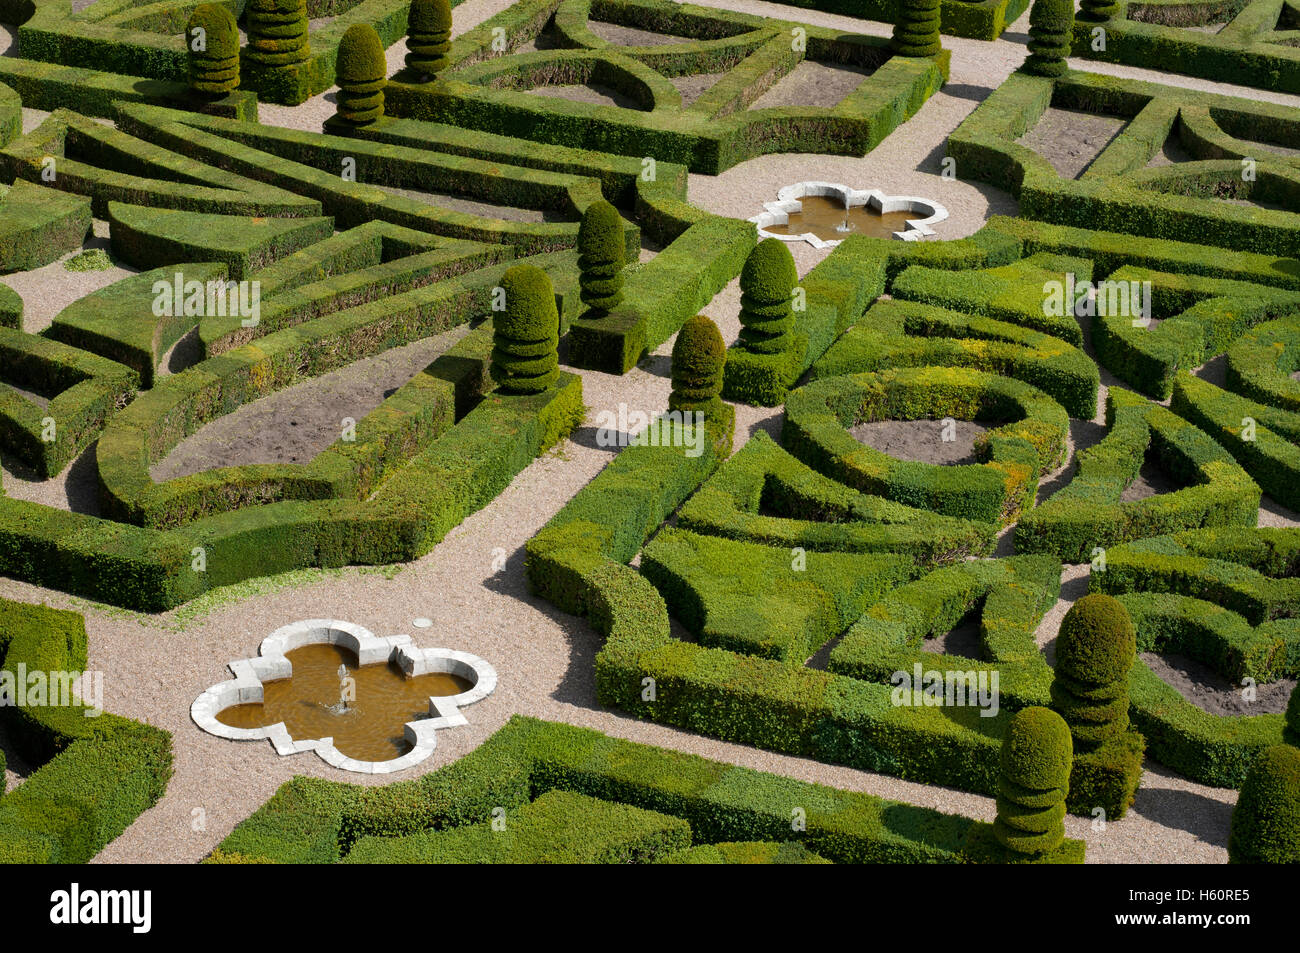 The castle and the gardens of Villandry, Loire Valley, France. The beautiful castle and gardens at Villandry, UNESCO World Herit Stock Photo